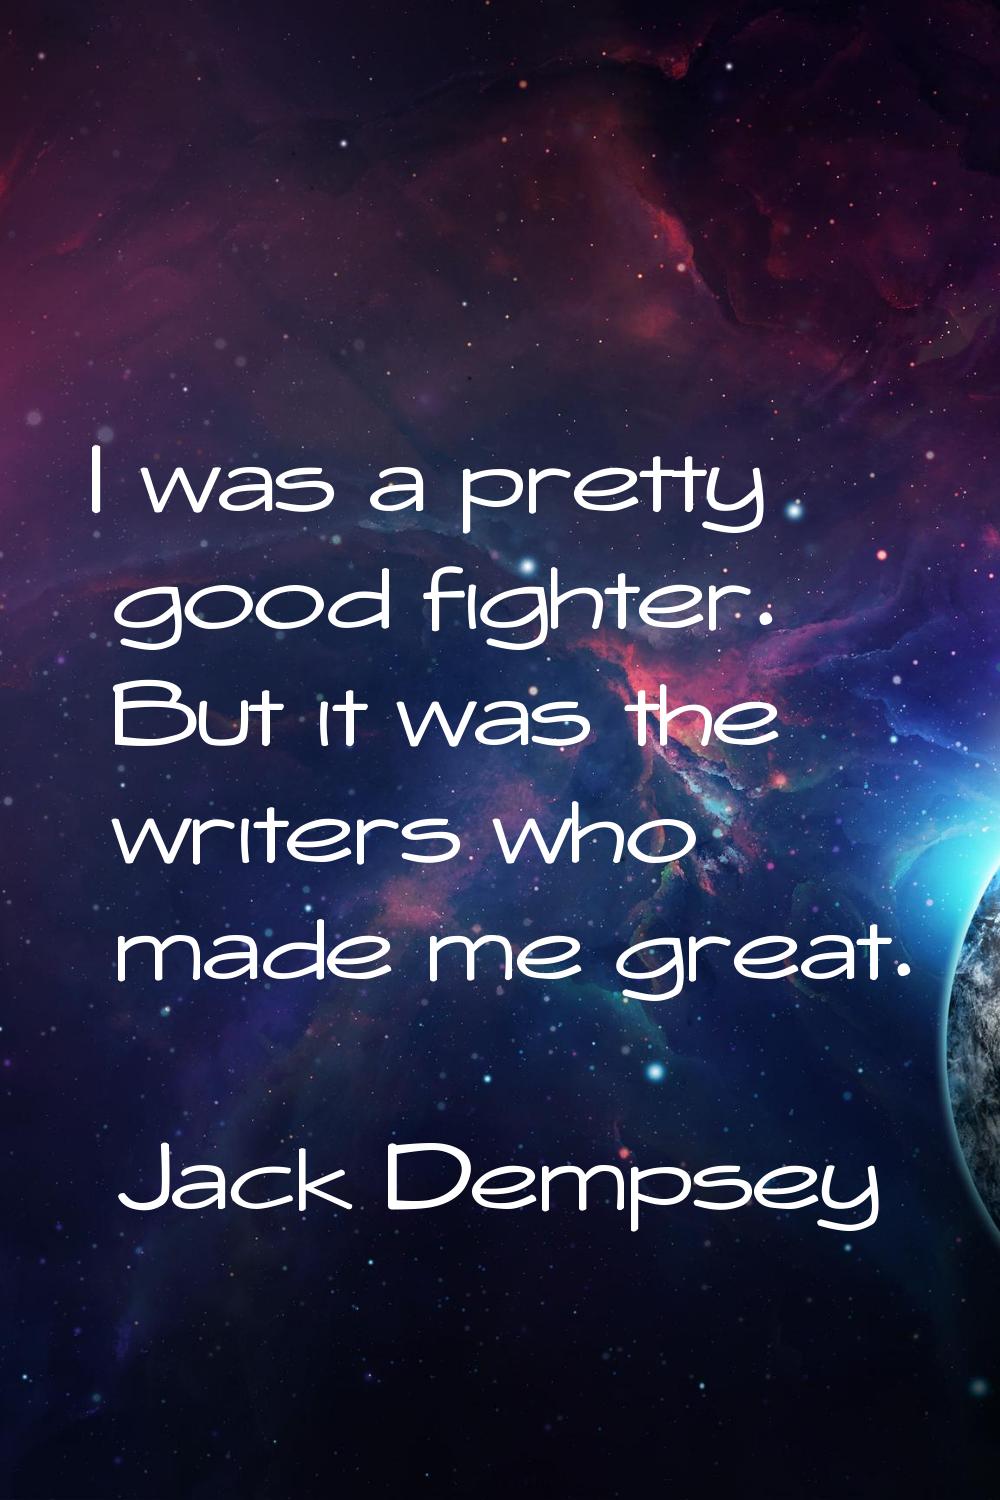 I was a pretty good fighter. But it was the writers who made me great.